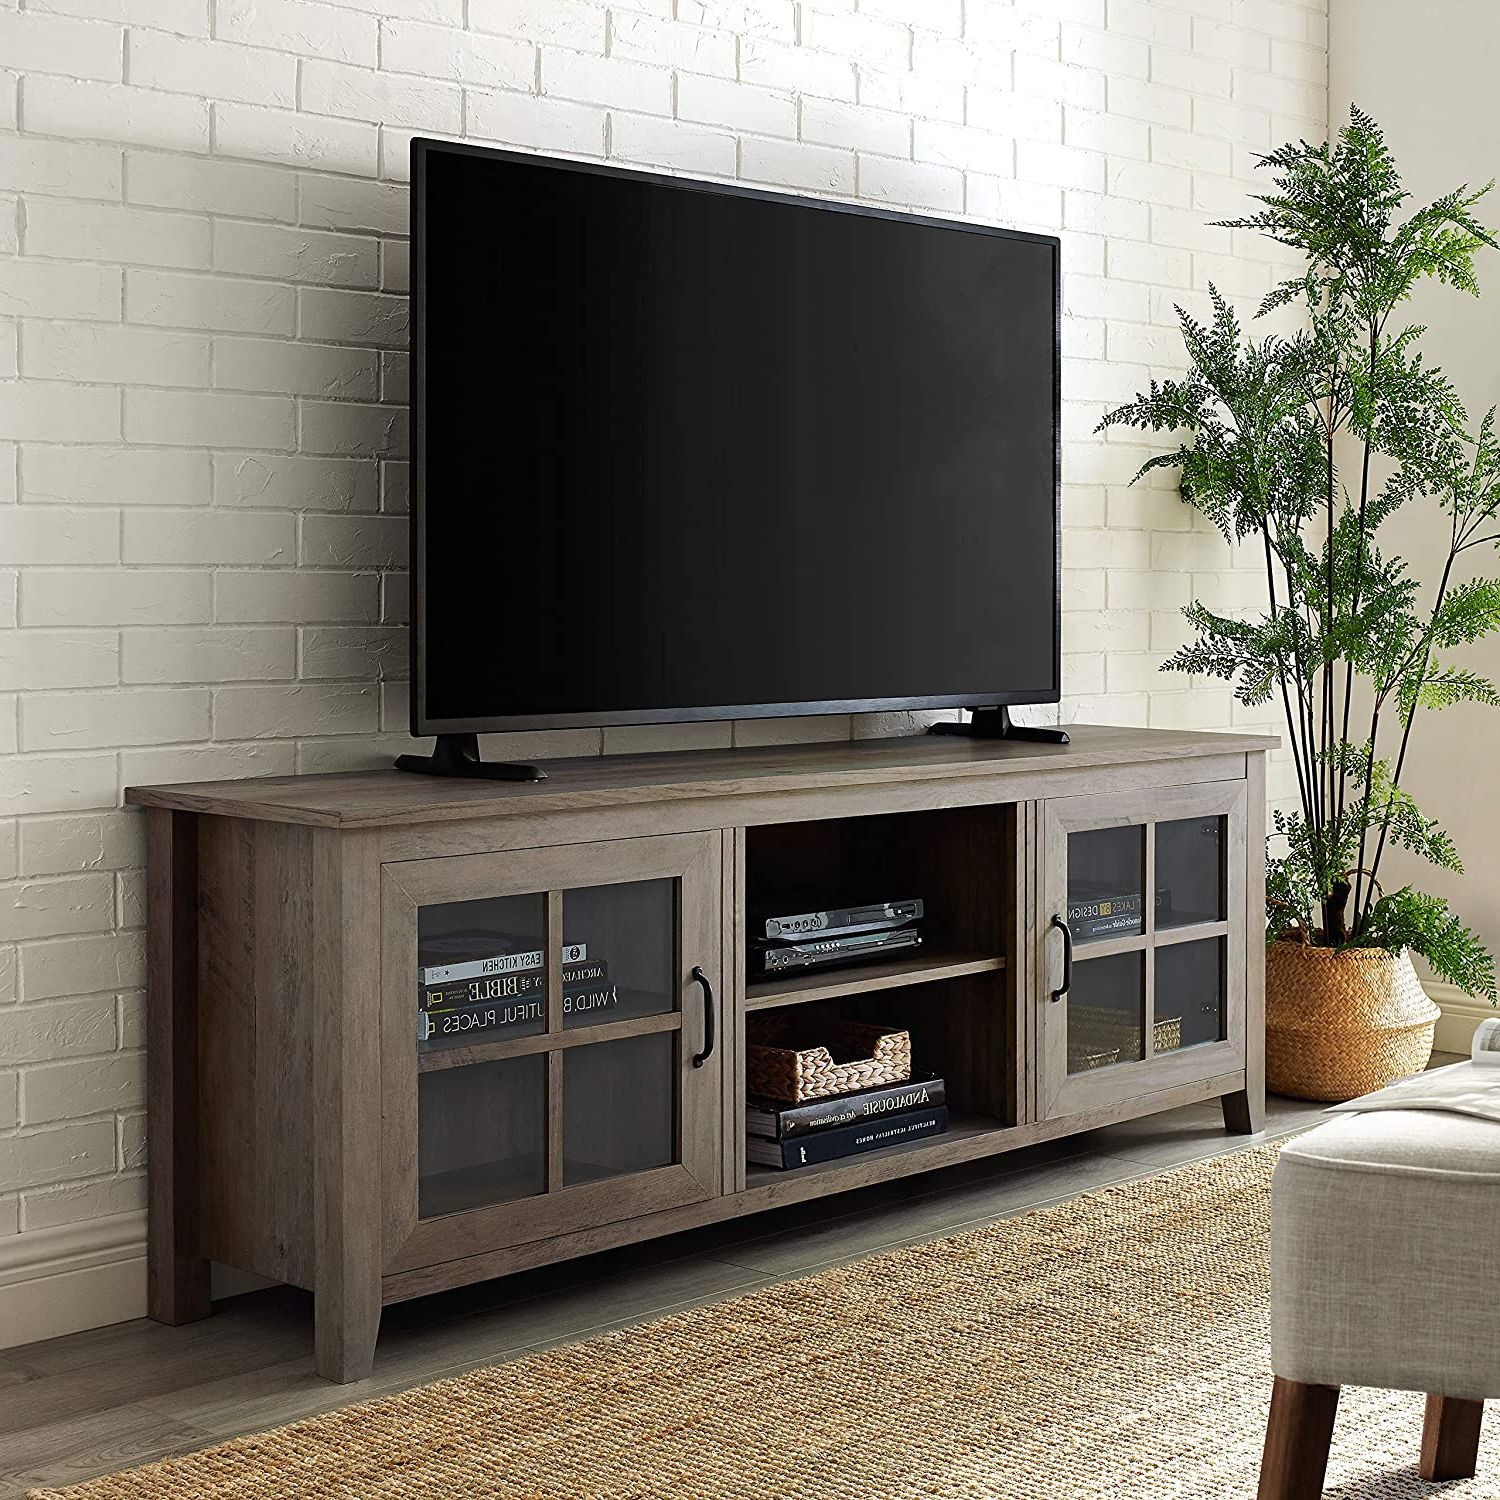 Walker Edison Modern Farmhouse Glass And Wood Stand With With Regard To 2017 Glass Tv Stands For Tvs Up To 70" (View 9 of 10)